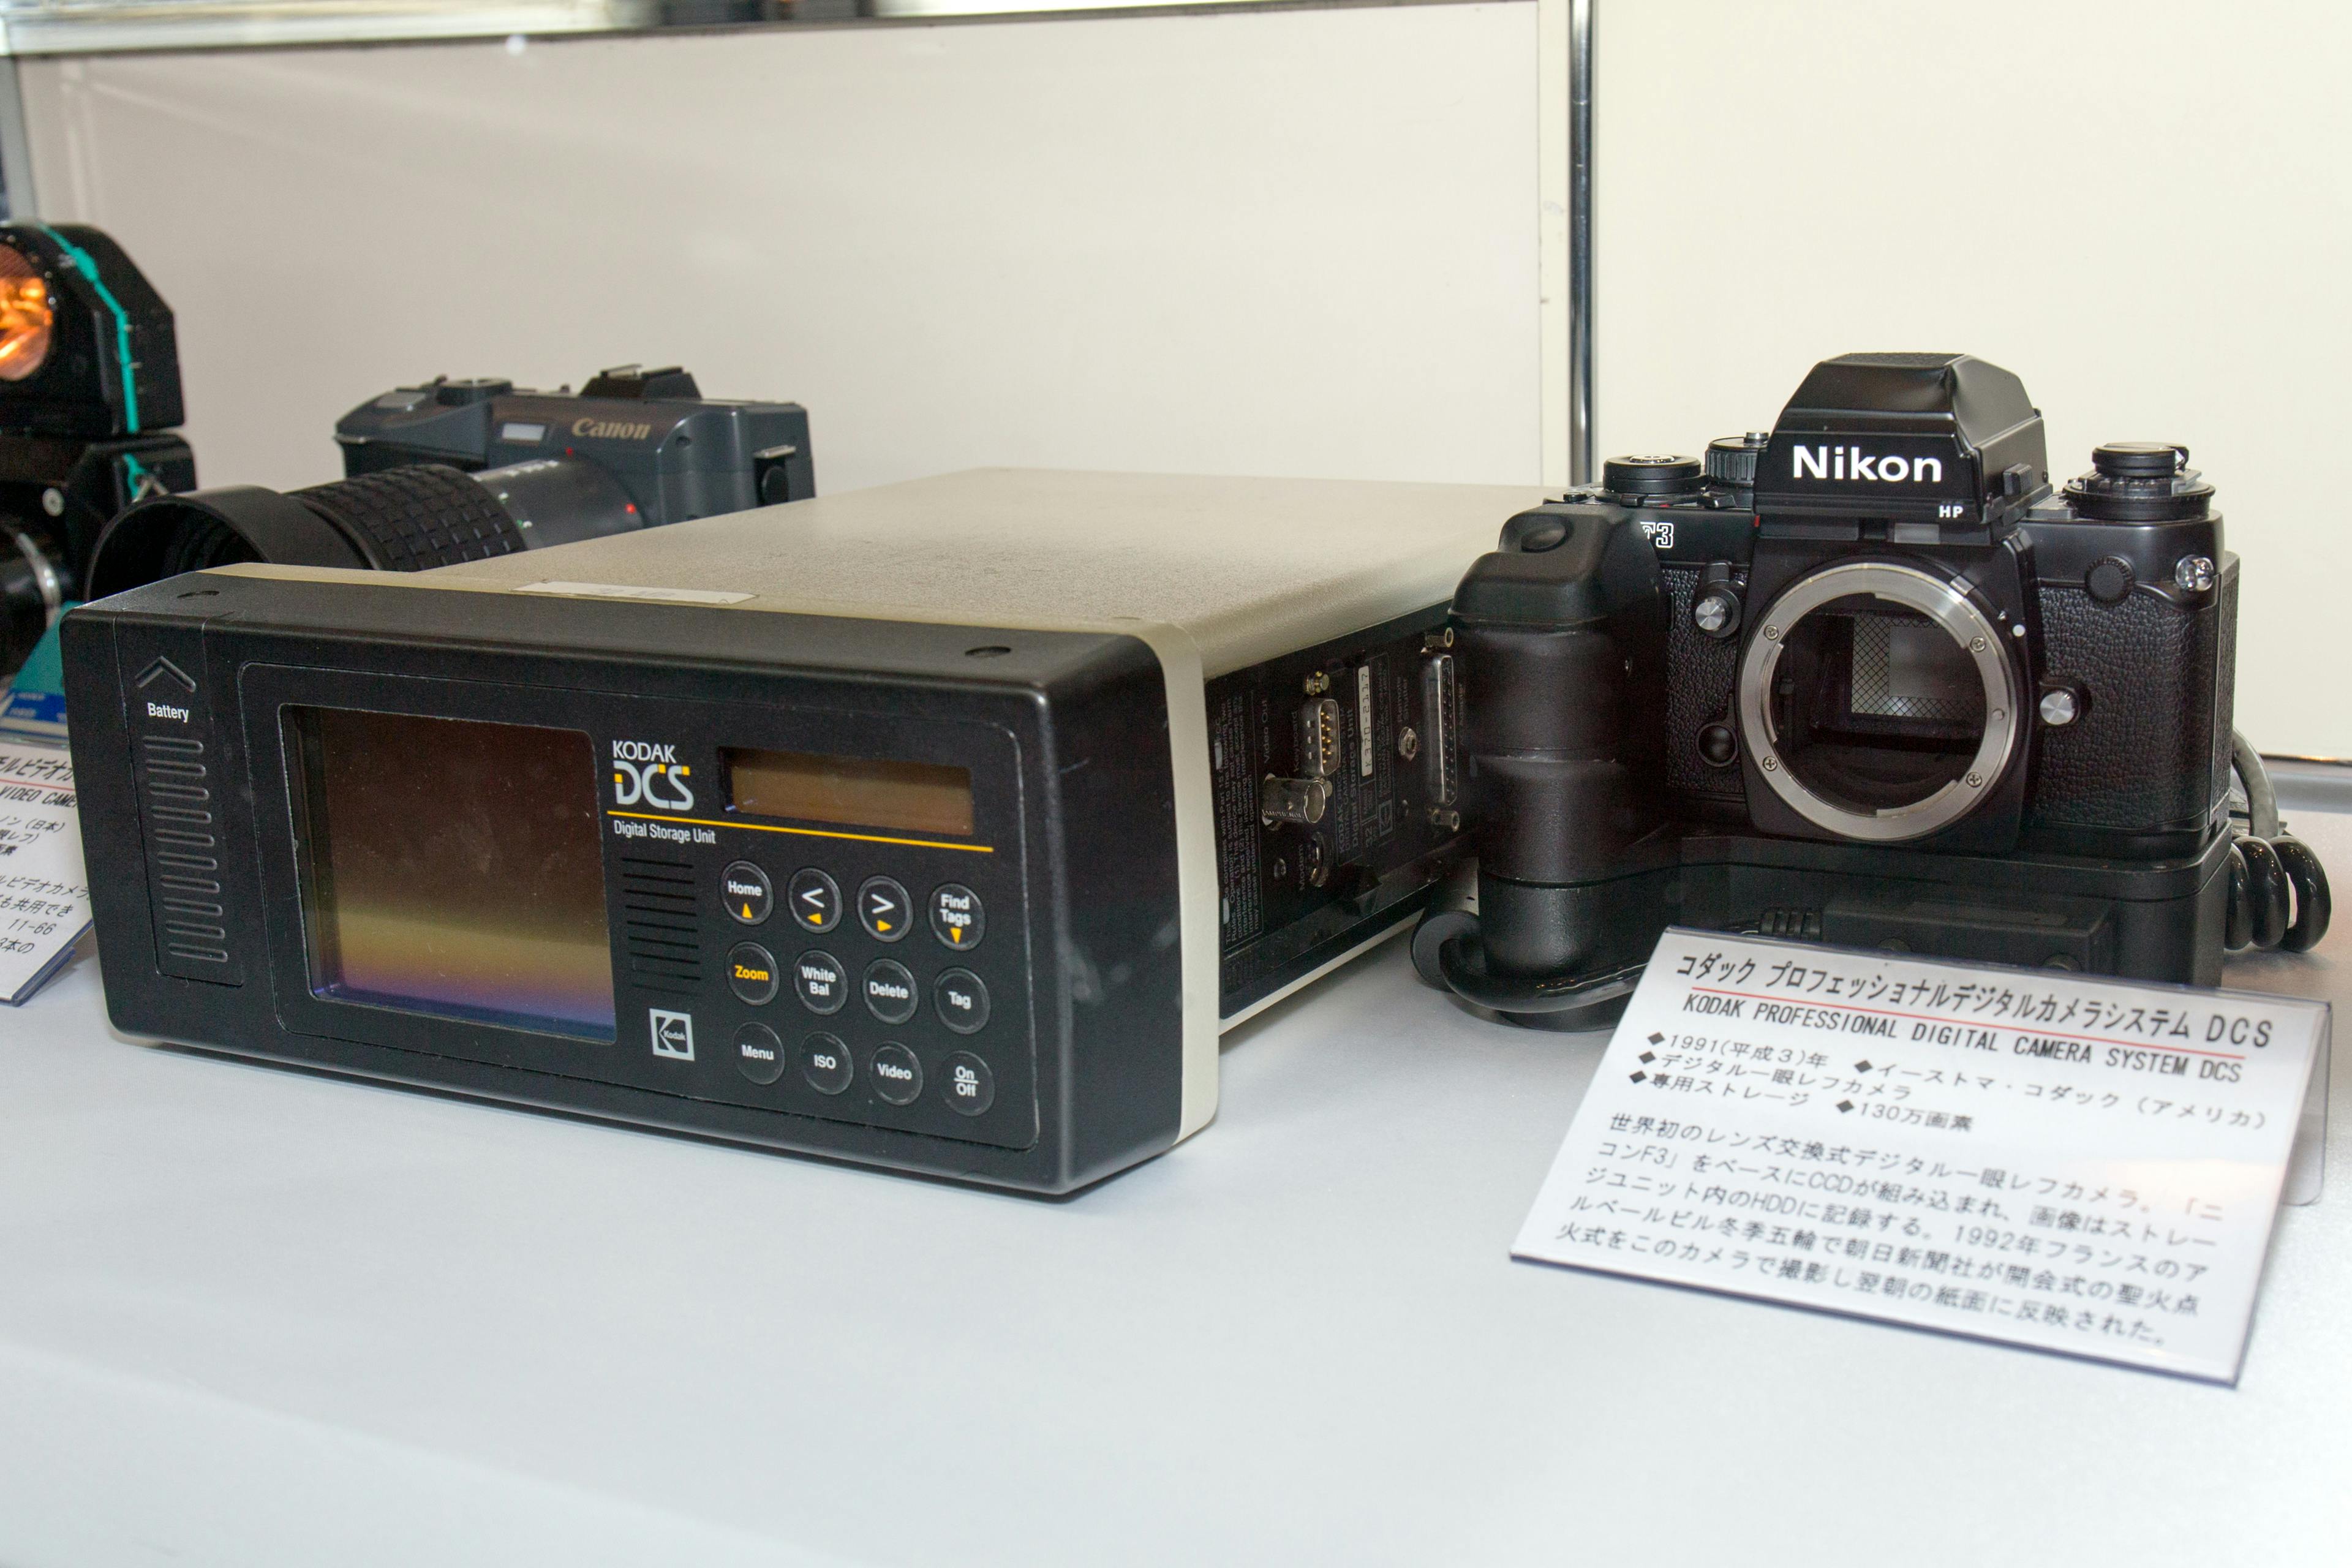 The first DSLR was the Kodak DCS 100 mounted on a Nikon F3 body